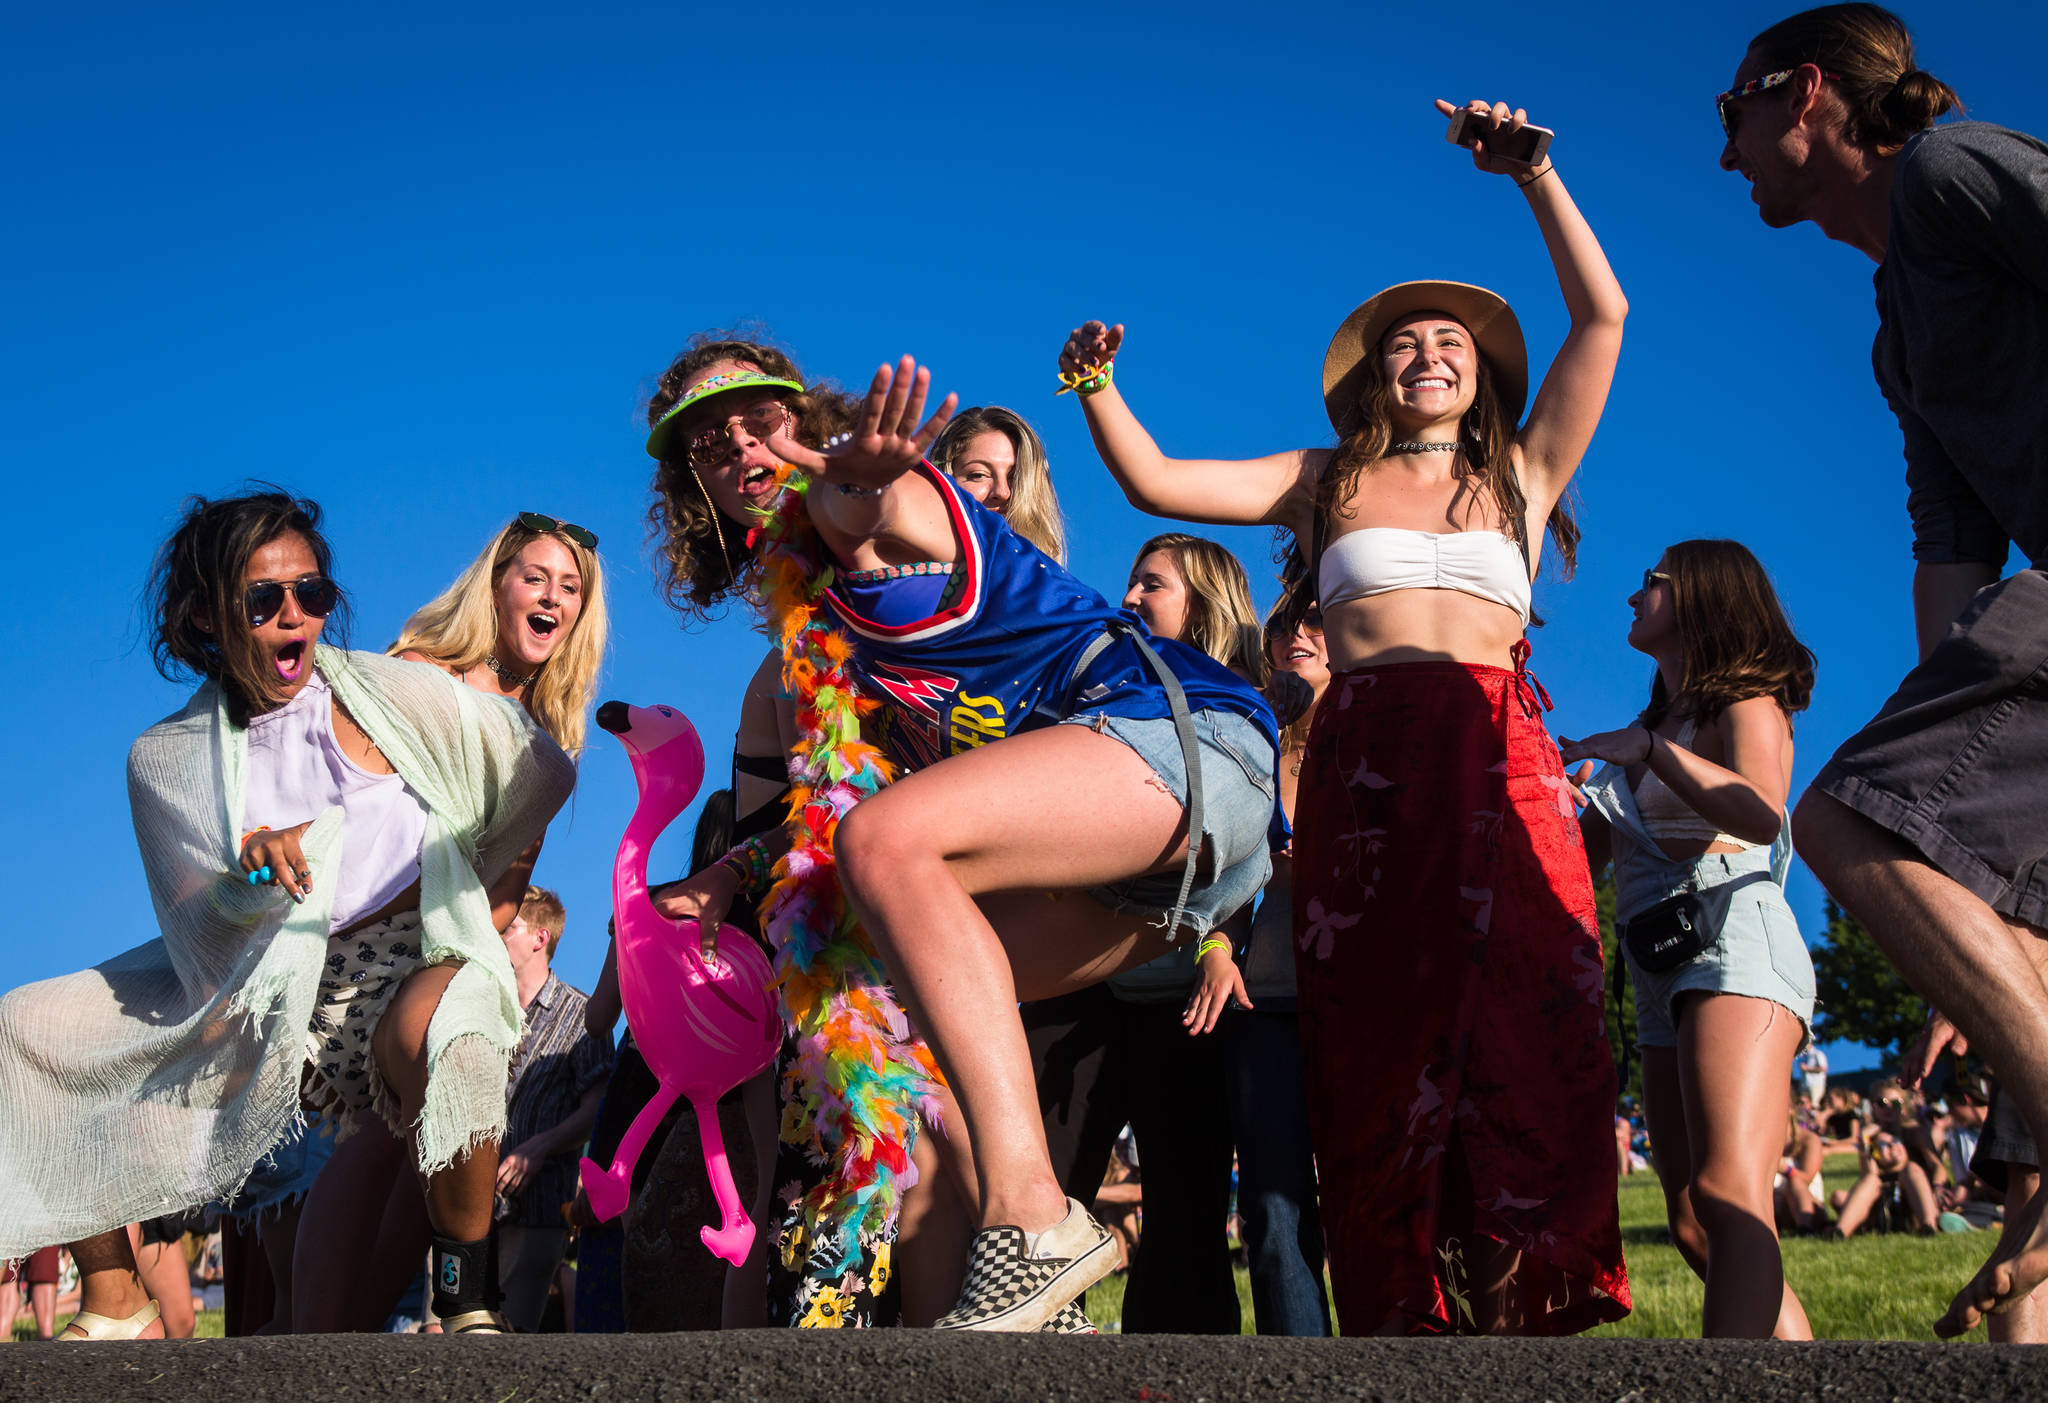 Festival-goers dance on the hill near the main stage on the first of three days during the annual Sasquatch! Music Festival on Friday, May 26, 2017 in George, Wa. (Daniella Beccaria / For the Herald )